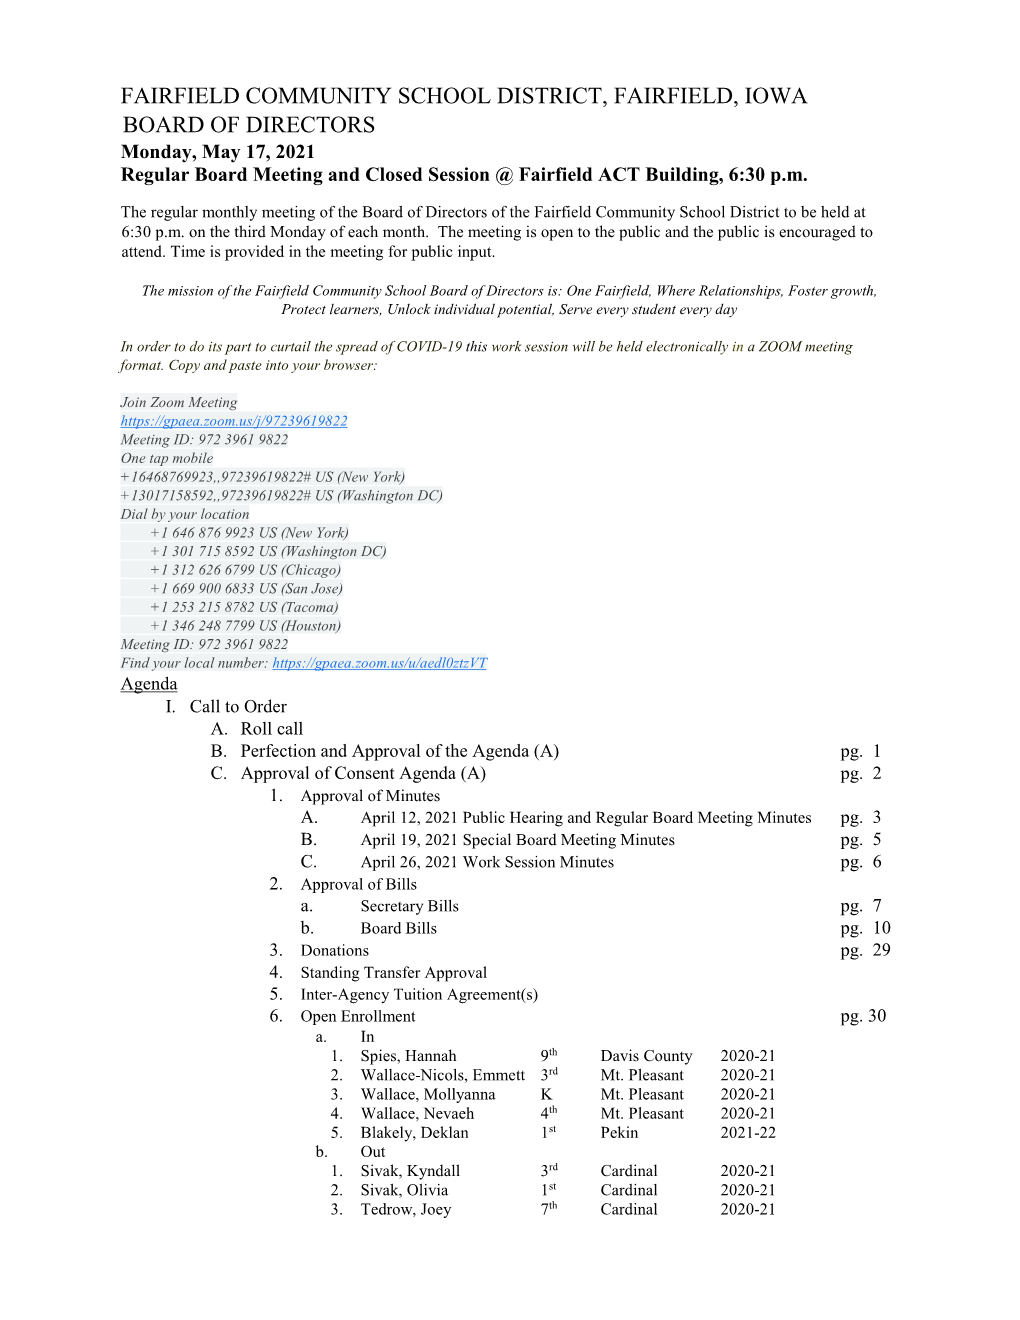 May 17, 2021 Regular Board Meeting and Closed Session Board Packet